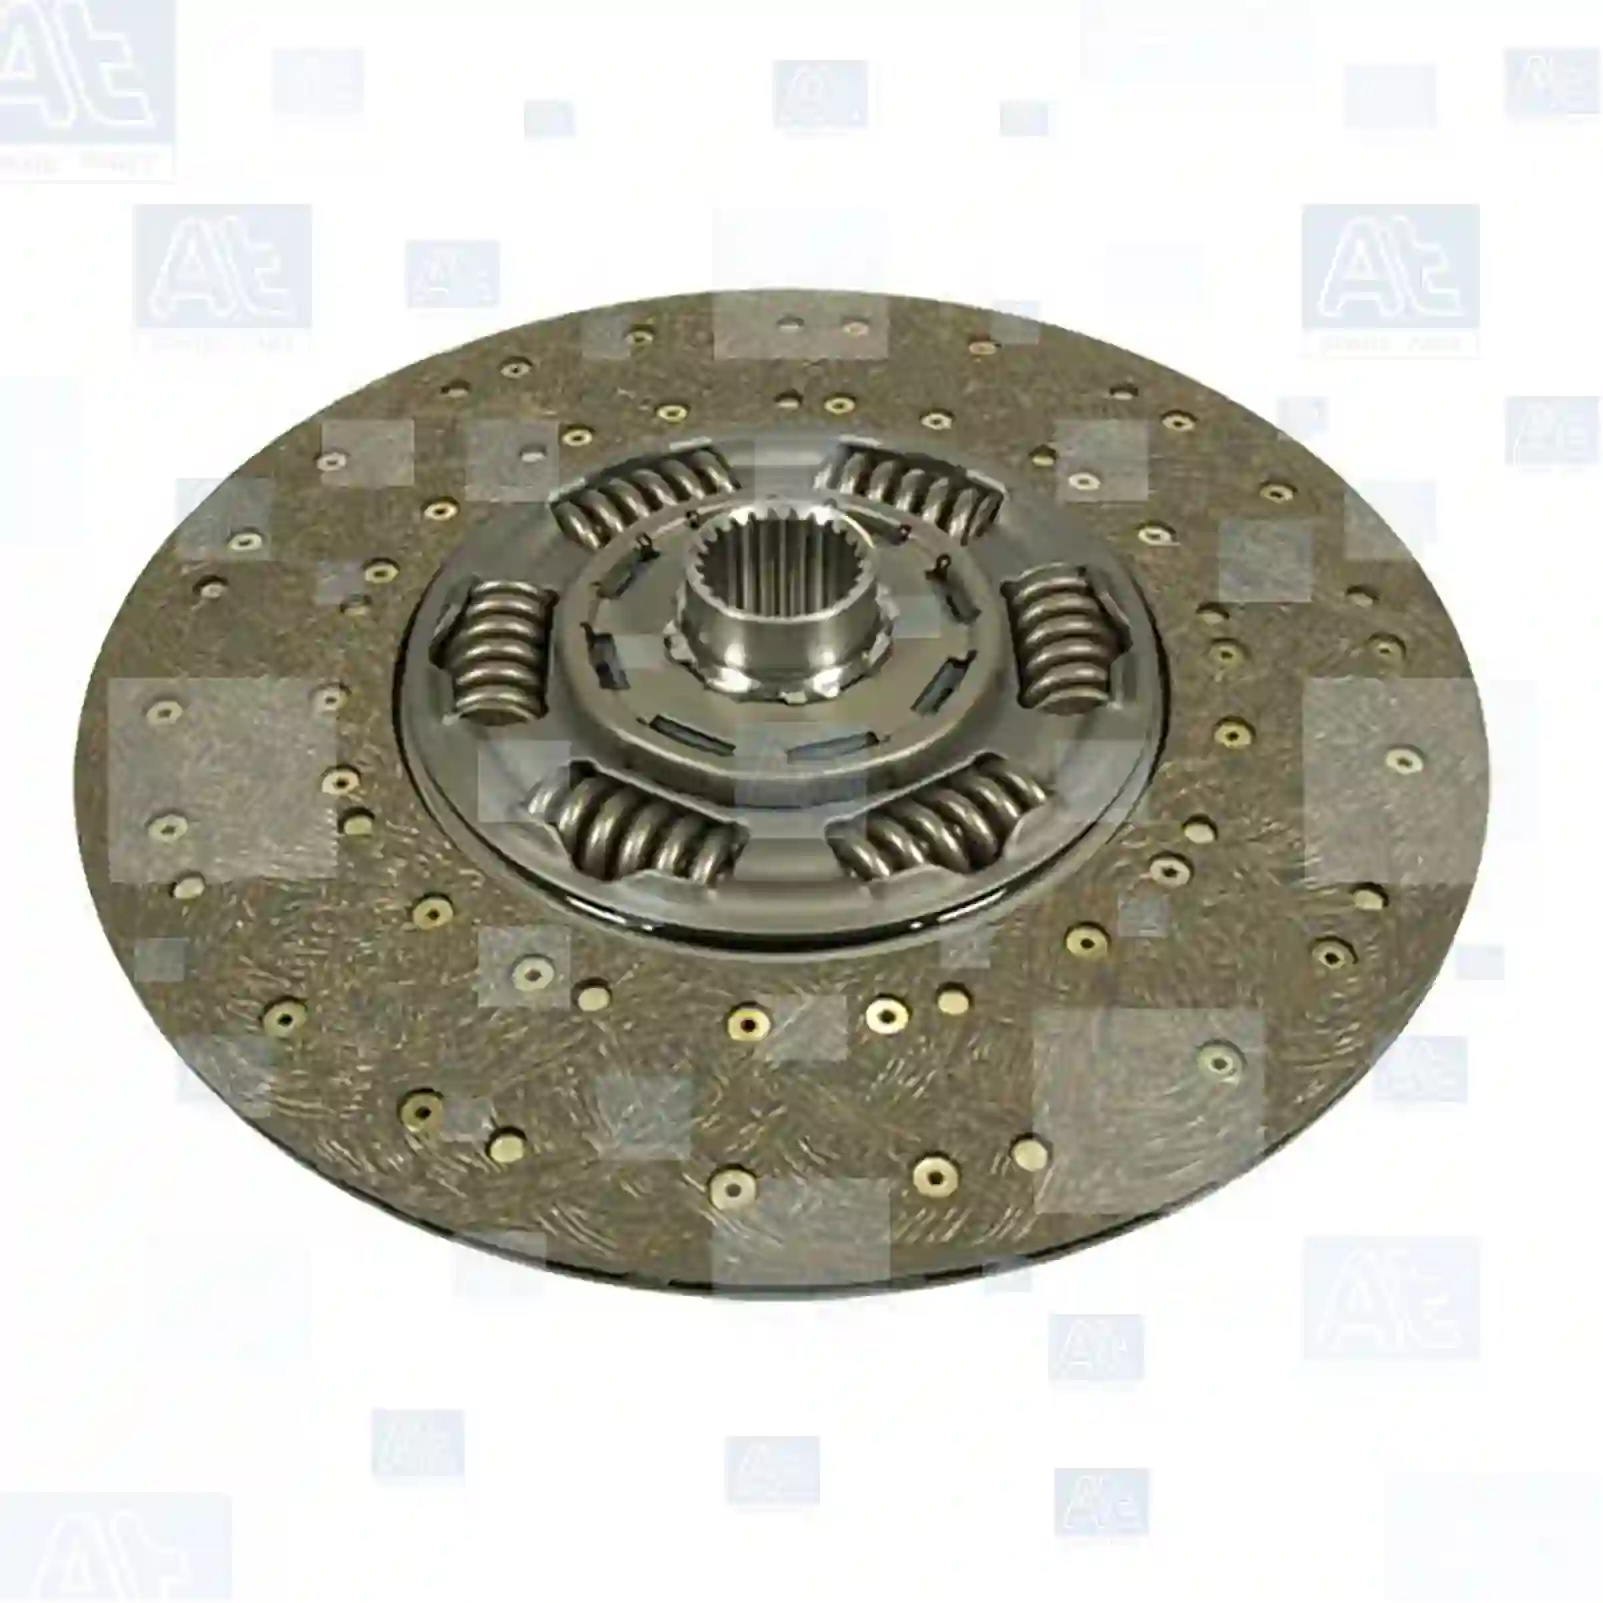 Clutch disc, at no 77722646, oem no: 10571255, 10571256, 10571262, 10571268, 10571271, 10571283, 10571284, 10571292, 1111148, 1210032, 1321253, 1321258, 1324883, 1340192, 1368697, 1386931, 1409769, 1412319, 1444110, 1510032, 1571255, 1571256, 1571262, 1571268, 1571271, 1571292, 1749123, 1929397, 510032, 571255, 571256, 571262, 571268, 571271, 571283, 571284, 571292, 571295, 571300, 571305, 571447, ZG30292-0008 At Spare Part | Engine, Accelerator Pedal, Camshaft, Connecting Rod, Crankcase, Crankshaft, Cylinder Head, Engine Suspension Mountings, Exhaust Manifold, Exhaust Gas Recirculation, Filter Kits, Flywheel Housing, General Overhaul Kits, Engine, Intake Manifold, Oil Cleaner, Oil Cooler, Oil Filter, Oil Pump, Oil Sump, Piston & Liner, Sensor & Switch, Timing Case, Turbocharger, Cooling System, Belt Tensioner, Coolant Filter, Coolant Pipe, Corrosion Prevention Agent, Drive, Expansion Tank, Fan, Intercooler, Monitors & Gauges, Radiator, Thermostat, V-Belt / Timing belt, Water Pump, Fuel System, Electronical Injector Unit, Feed Pump, Fuel Filter, cpl., Fuel Gauge Sender,  Fuel Line, Fuel Pump, Fuel Tank, Injection Line Kit, Injection Pump, Exhaust System, Clutch & Pedal, Gearbox, Propeller Shaft, Axles, Brake System, Hubs & Wheels, Suspension, Leaf Spring, Universal Parts / Accessories, Steering, Electrical System, Cabin Clutch disc, at no 77722646, oem no: 10571255, 10571256, 10571262, 10571268, 10571271, 10571283, 10571284, 10571292, 1111148, 1210032, 1321253, 1321258, 1324883, 1340192, 1368697, 1386931, 1409769, 1412319, 1444110, 1510032, 1571255, 1571256, 1571262, 1571268, 1571271, 1571292, 1749123, 1929397, 510032, 571255, 571256, 571262, 571268, 571271, 571283, 571284, 571292, 571295, 571300, 571305, 571447, ZG30292-0008 At Spare Part | Engine, Accelerator Pedal, Camshaft, Connecting Rod, Crankcase, Crankshaft, Cylinder Head, Engine Suspension Mountings, Exhaust Manifold, Exhaust Gas Recirculation, Filter Kits, Flywheel Housing, General Overhaul Kits, Engine, Intake Manifold, Oil Cleaner, Oil Cooler, Oil Filter, Oil Pump, Oil Sump, Piston & Liner, Sensor & Switch, Timing Case, Turbocharger, Cooling System, Belt Tensioner, Coolant Filter, Coolant Pipe, Corrosion Prevention Agent, Drive, Expansion Tank, Fan, Intercooler, Monitors & Gauges, Radiator, Thermostat, V-Belt / Timing belt, Water Pump, Fuel System, Electronical Injector Unit, Feed Pump, Fuel Filter, cpl., Fuel Gauge Sender,  Fuel Line, Fuel Pump, Fuel Tank, Injection Line Kit, Injection Pump, Exhaust System, Clutch & Pedal, Gearbox, Propeller Shaft, Axles, Brake System, Hubs & Wheels, Suspension, Leaf Spring, Universal Parts / Accessories, Steering, Electrical System, Cabin